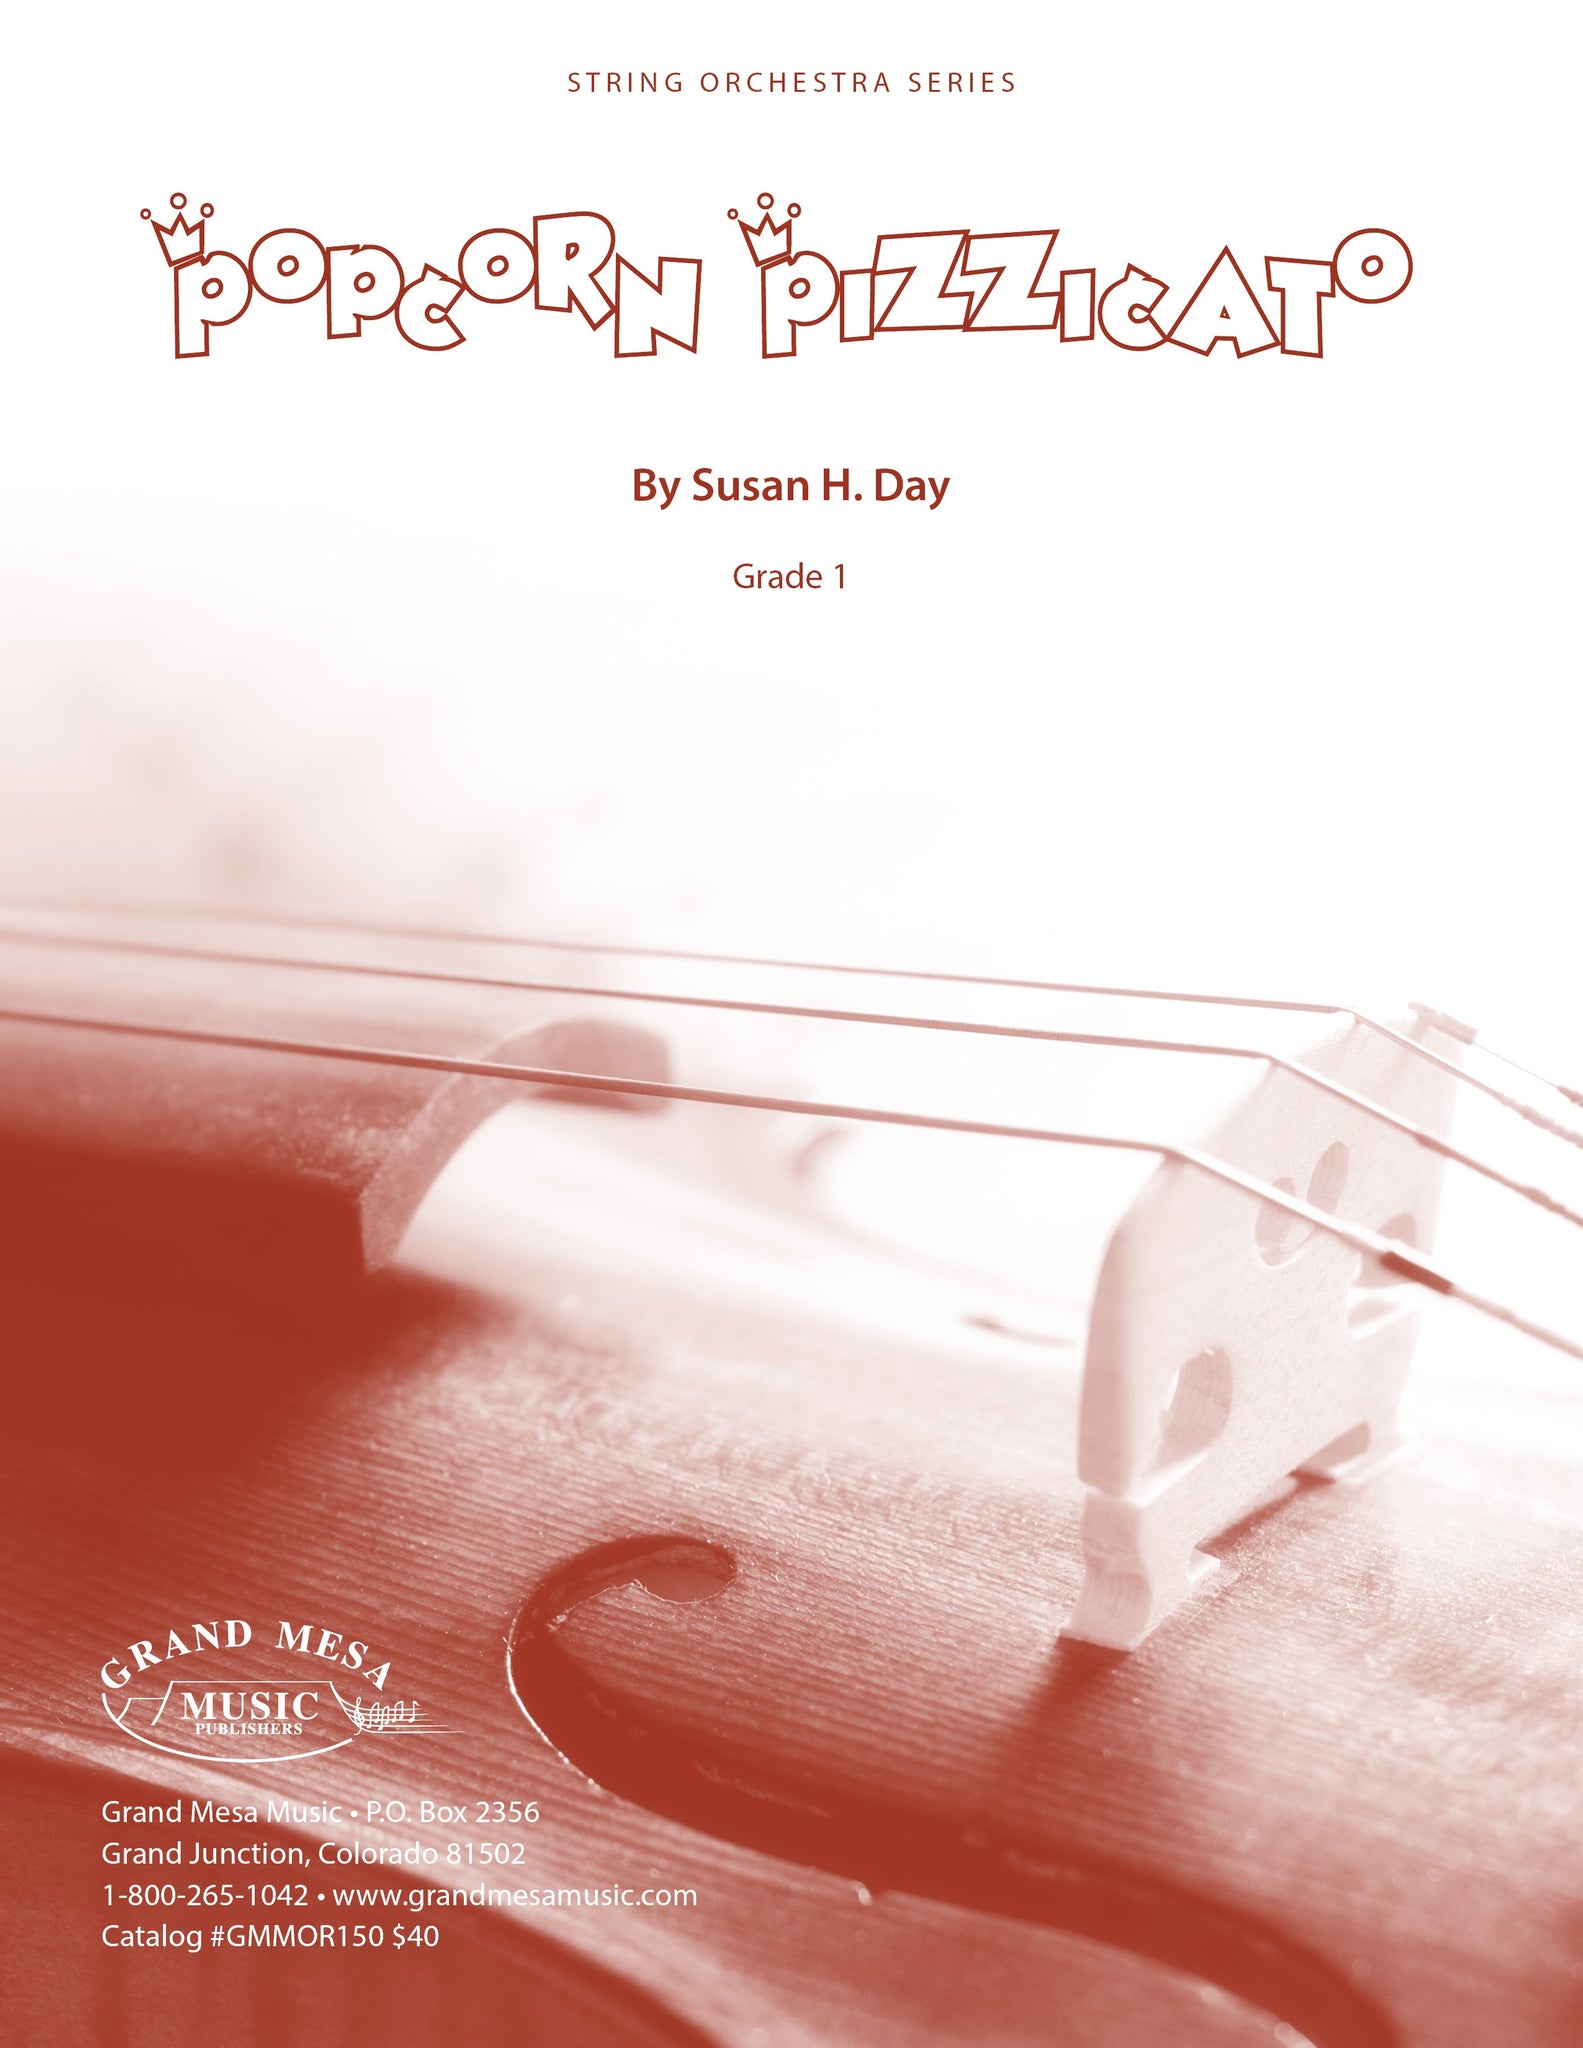 Strings sheet music cover of Popcorn Pizzicato, composed by Susan Day.